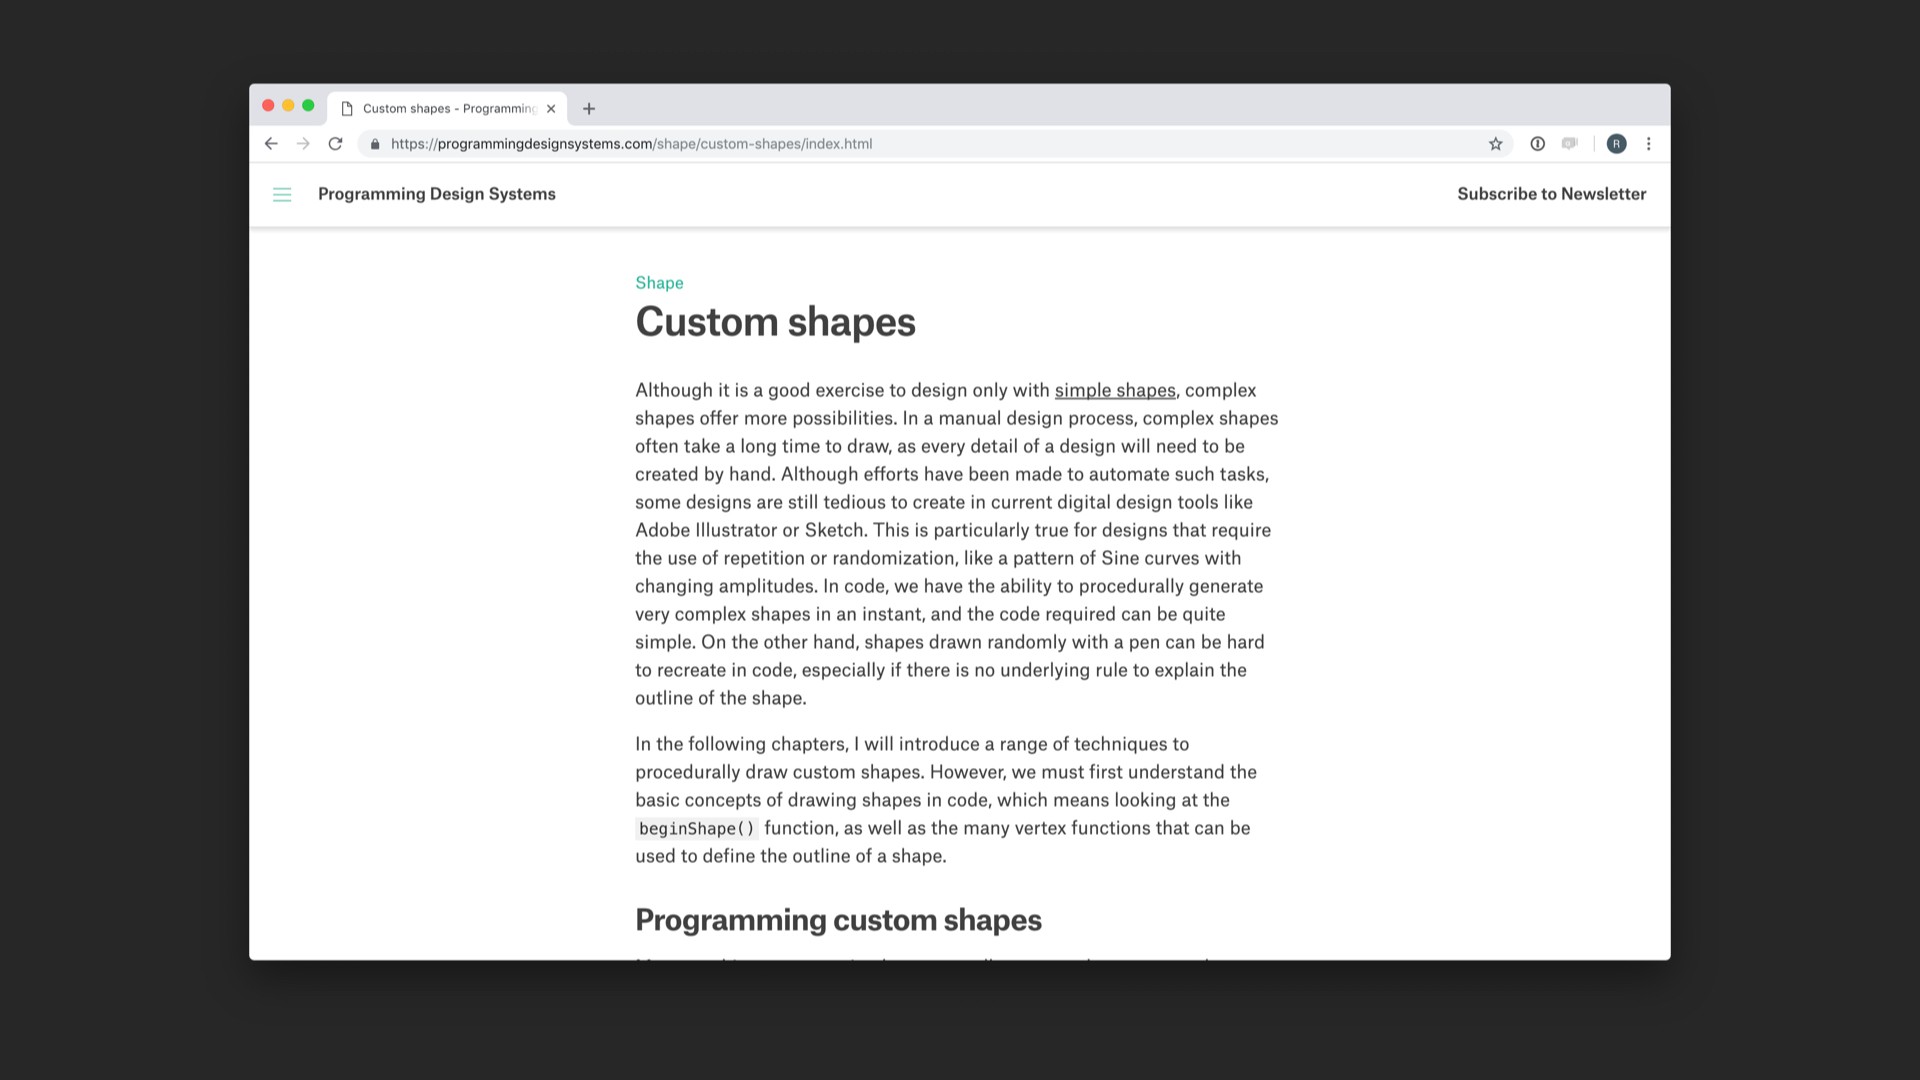 Screenshot of 'Custom shapes' chapter of referenced website.